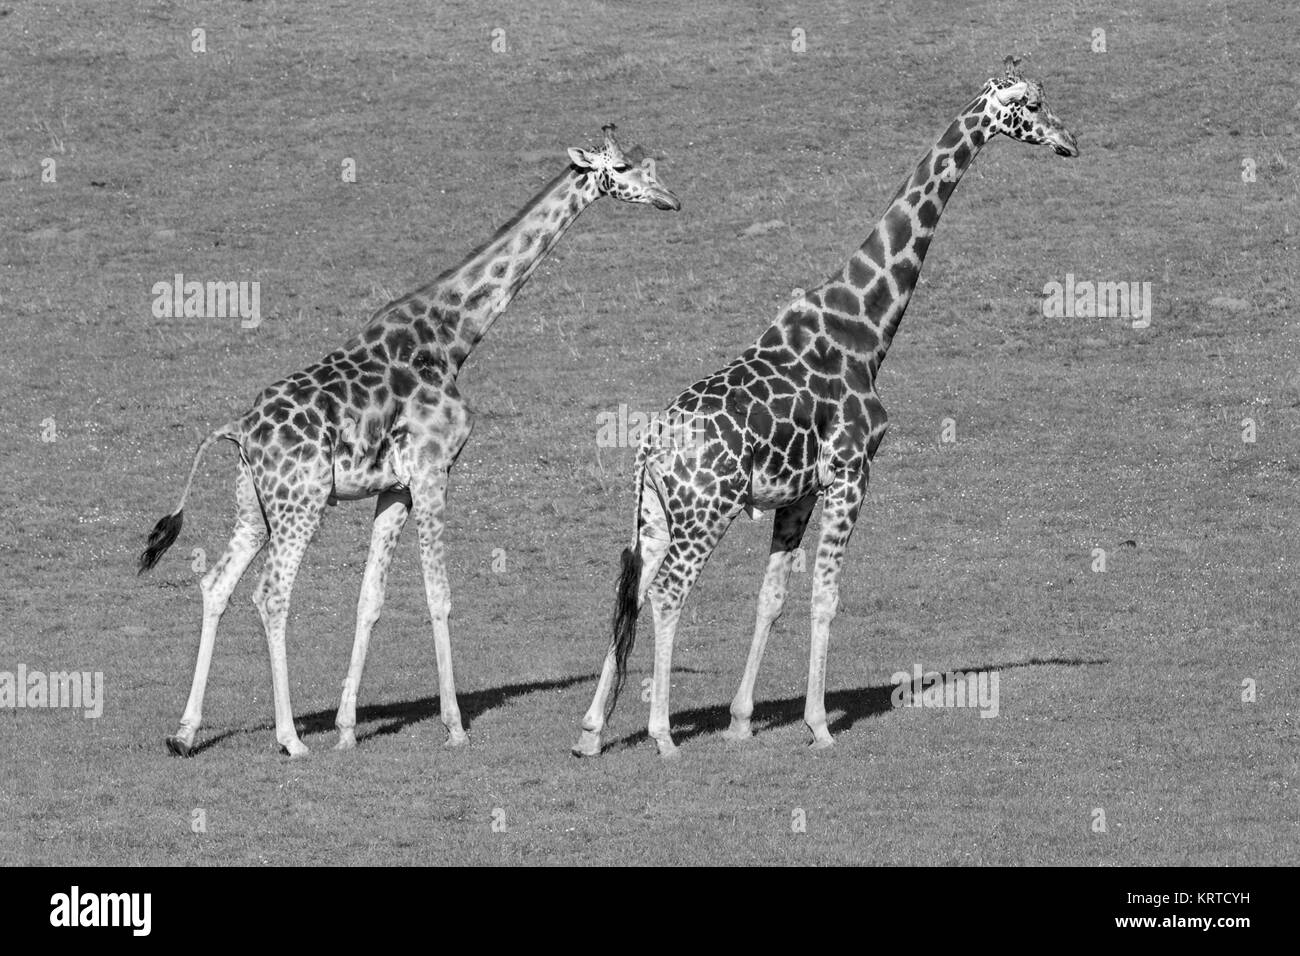 The giraffe (Giraffa) is a genus of African even-toed ungulate mammals, the tallest living terrestrial animals and the largest ruminants. Stock Photo